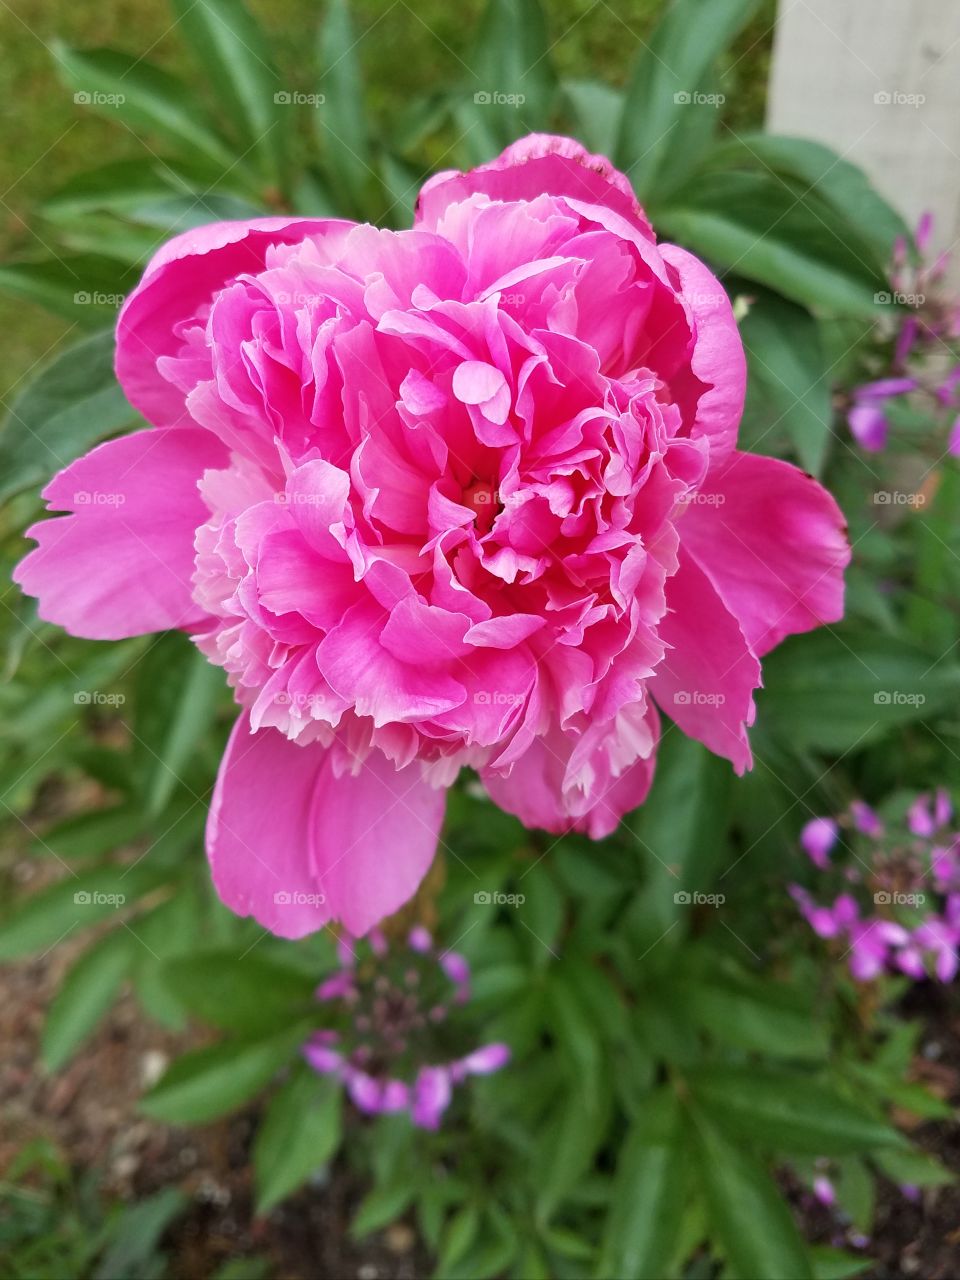 This beautiful peony was the only one I managed to have this year. I still say I'll take quality over quantity.